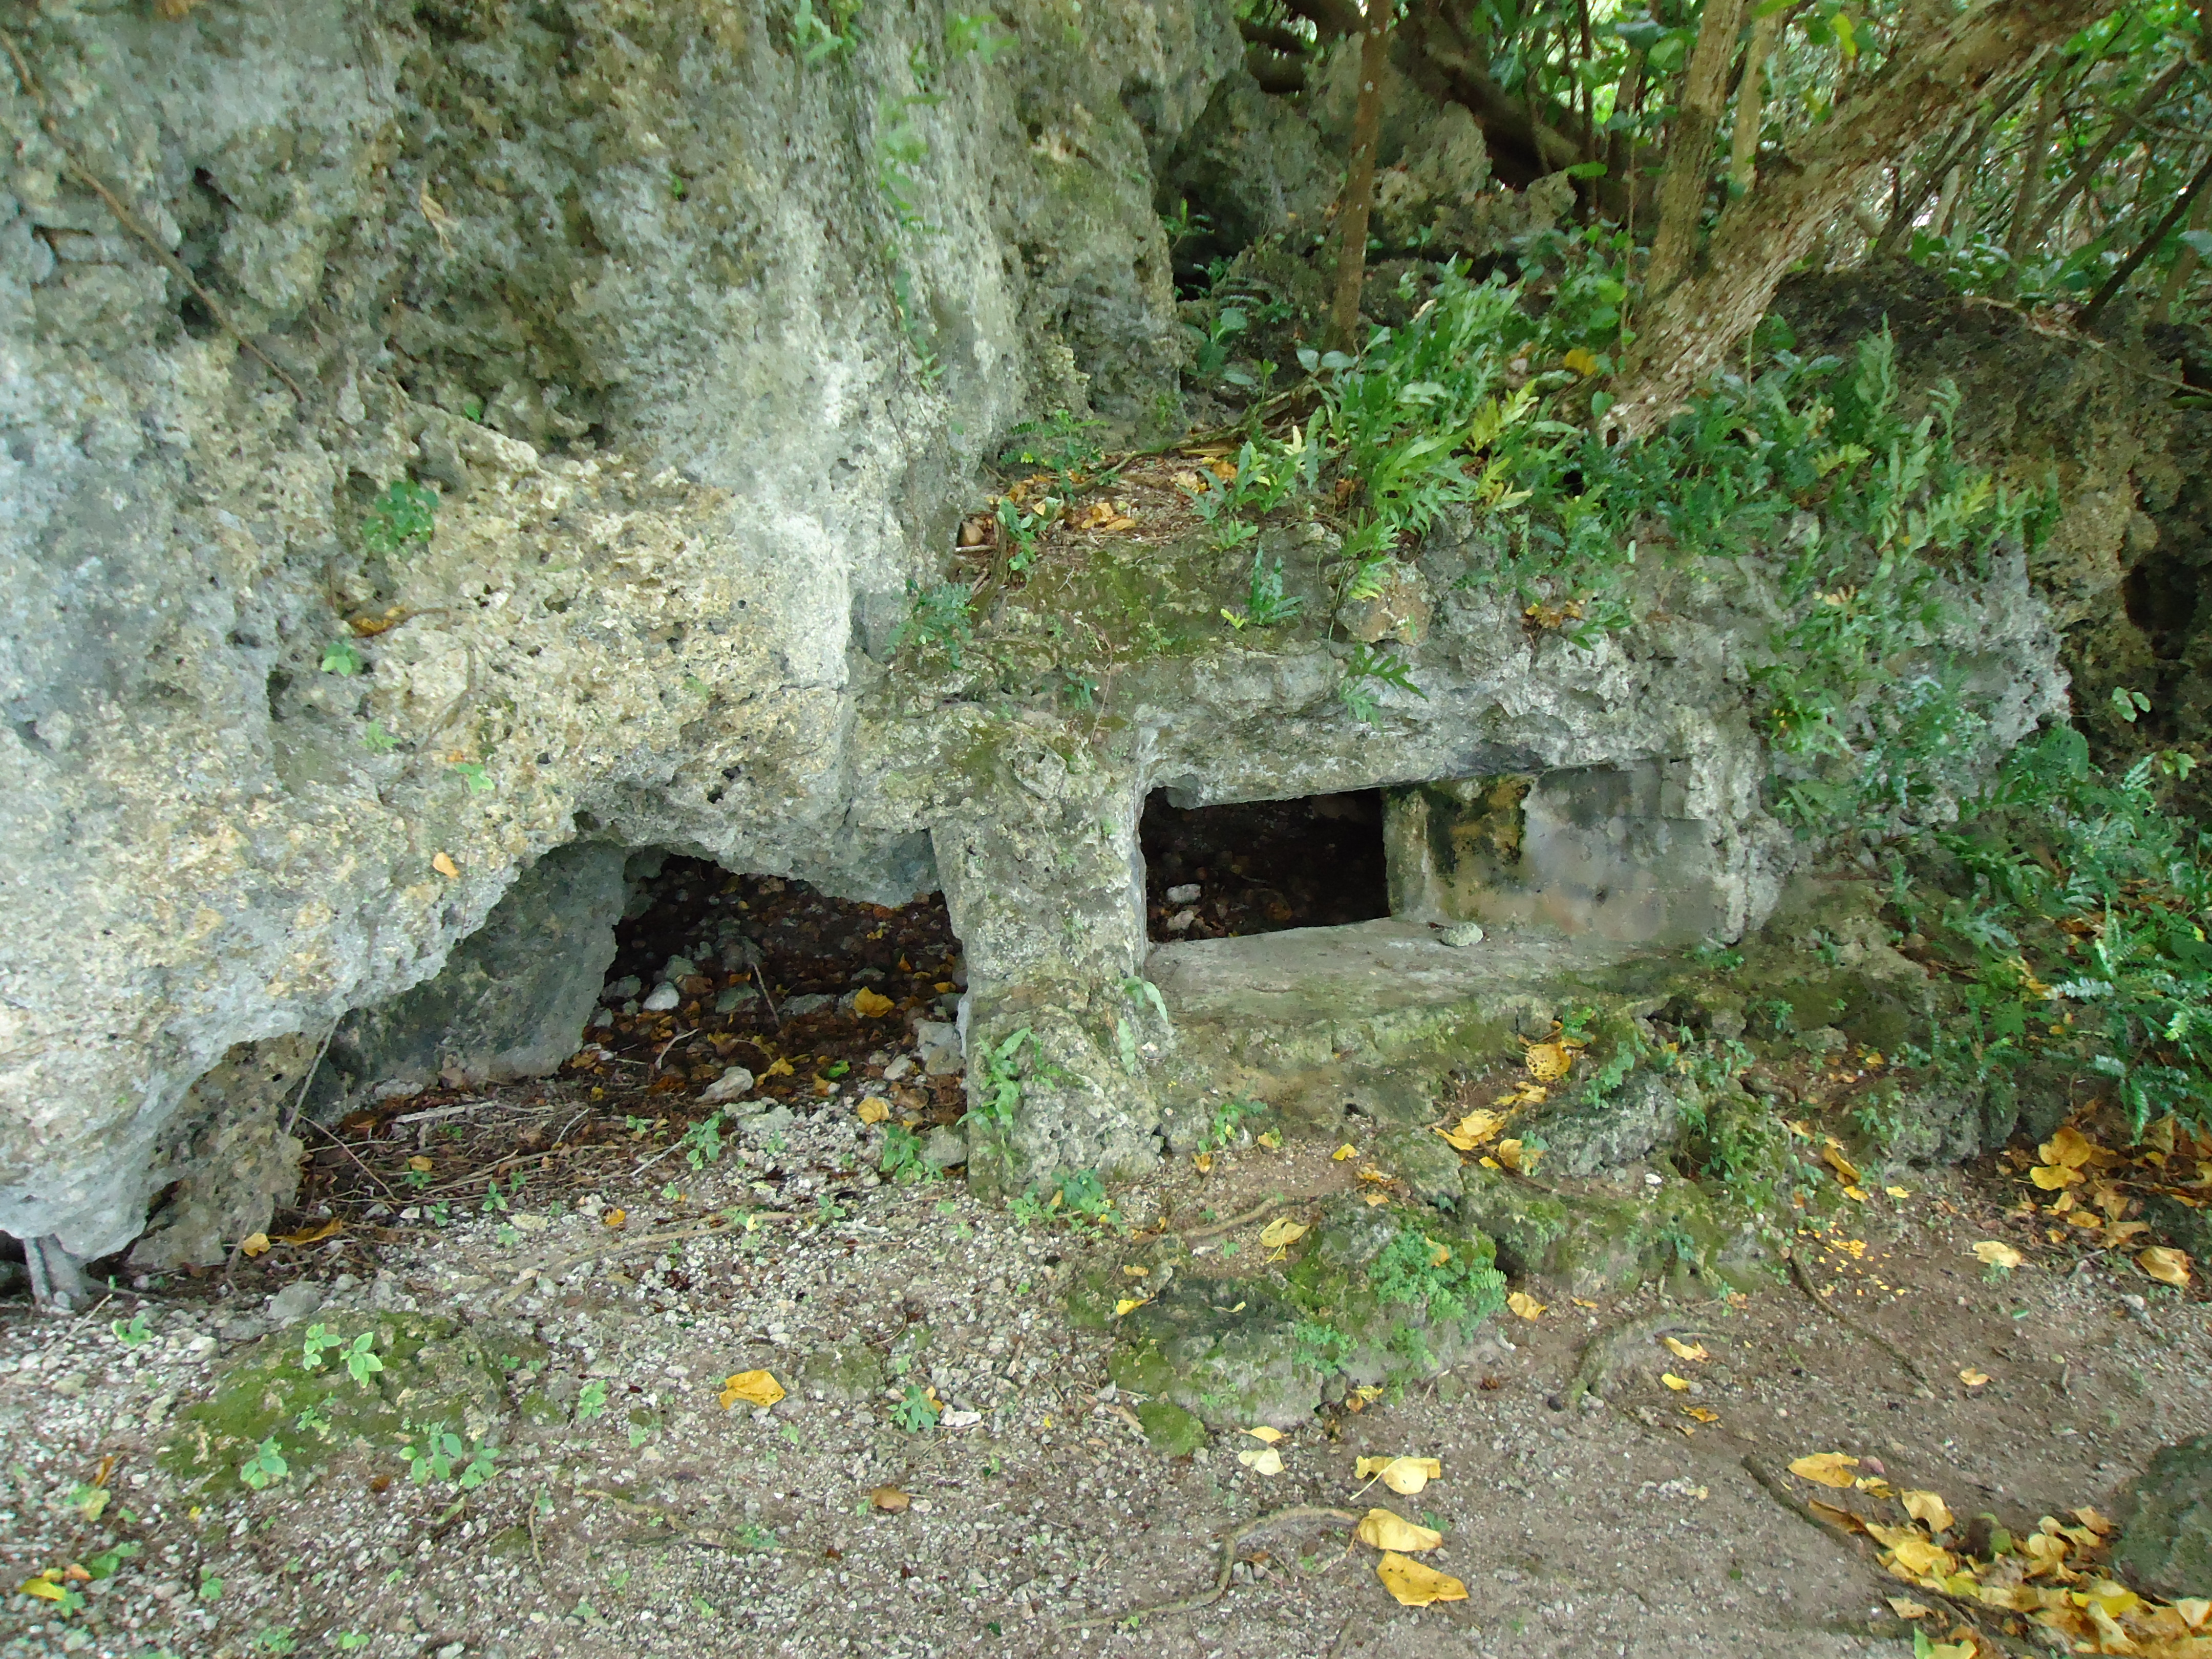  Japanese pill boxes, reminders of the Japanese occupation of Guam during World War II, can still be found all over the island. (Photo credit: Wendie Burbridge) 